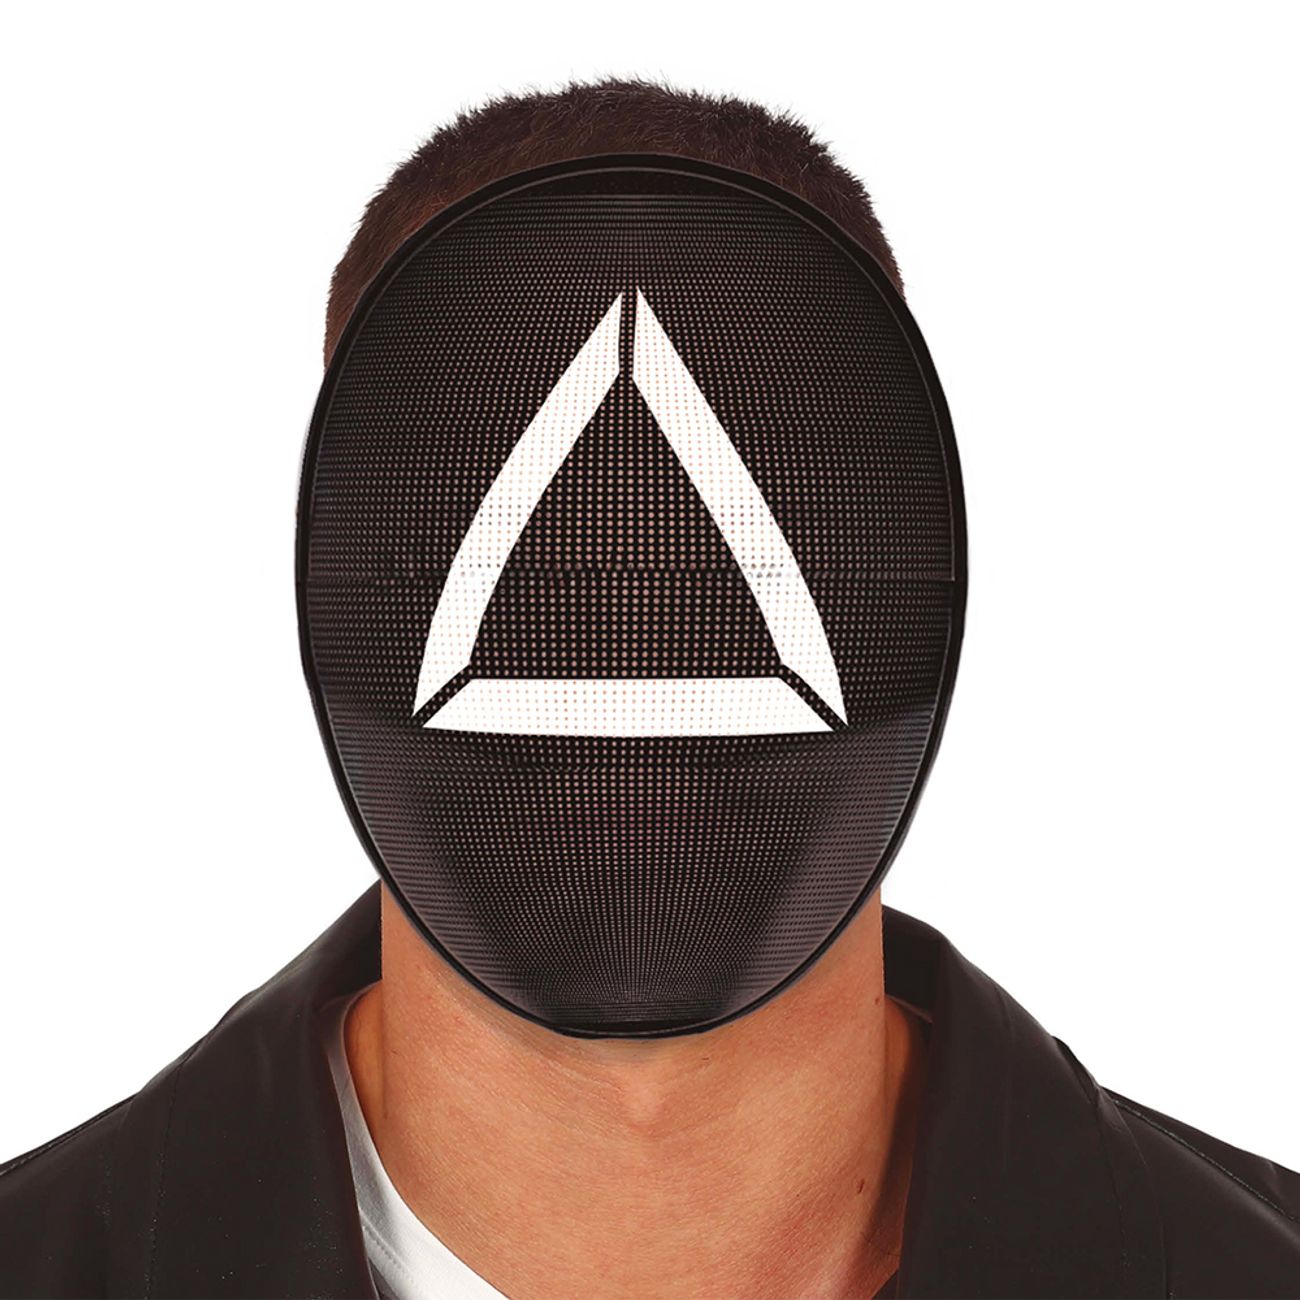 the-gamer-triangle-mask-82647-1